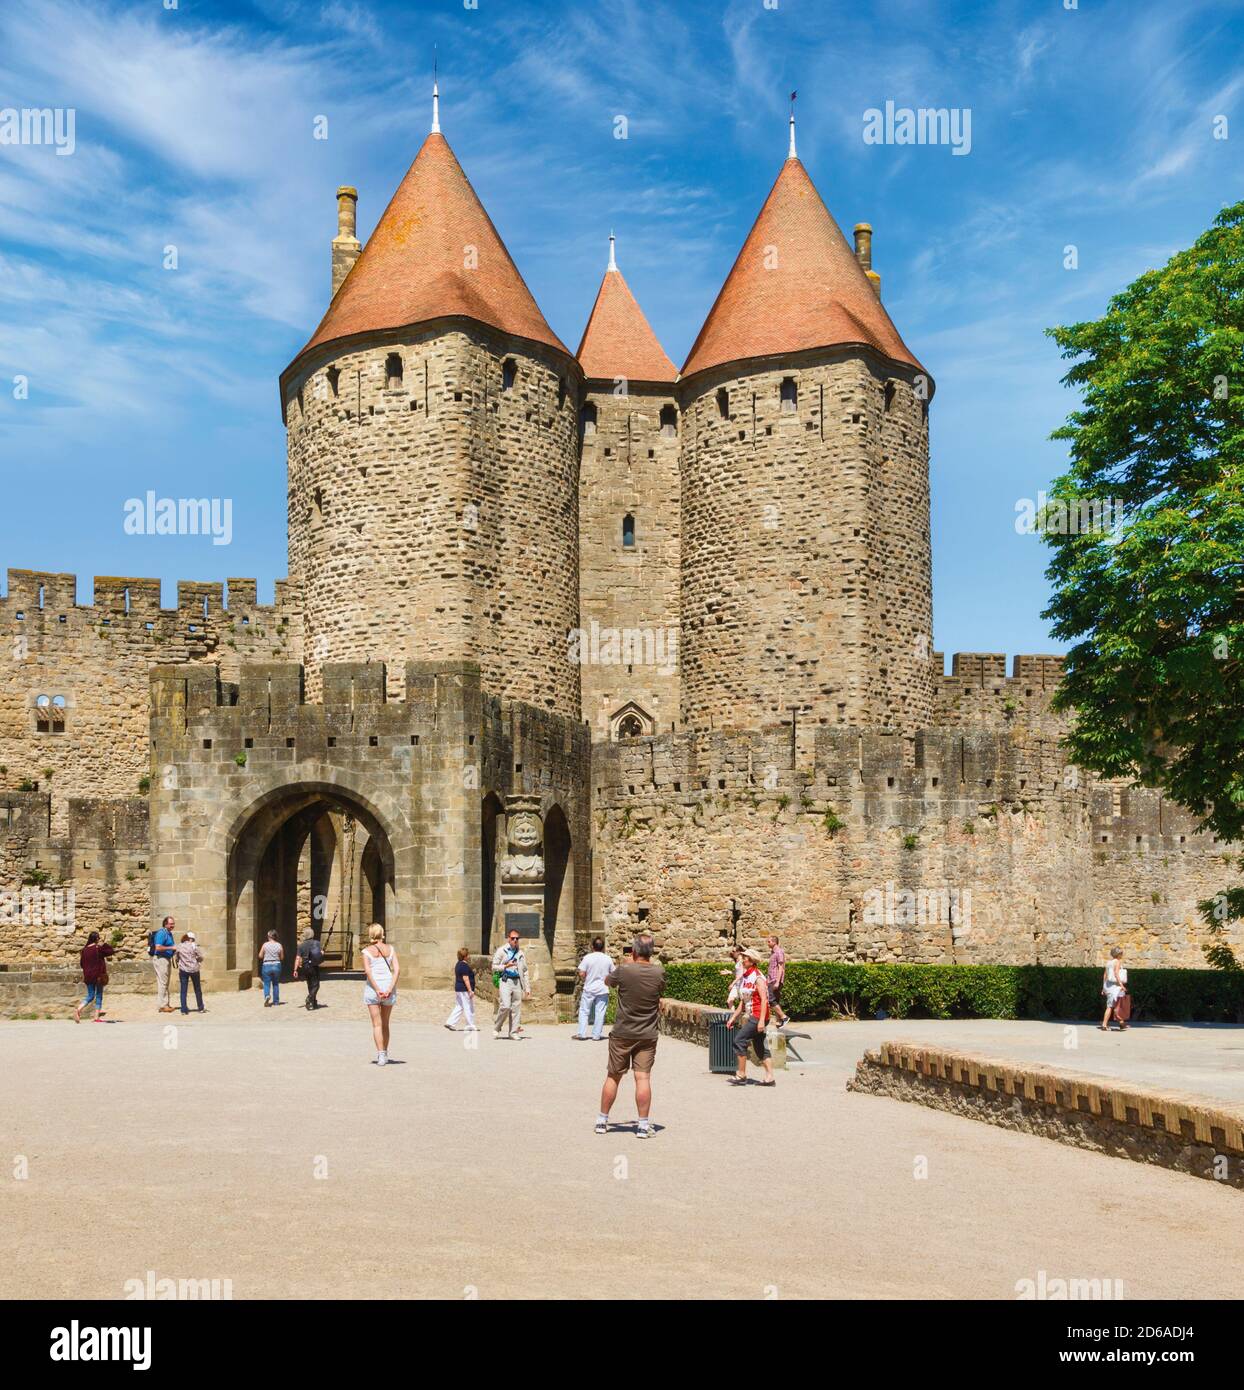 Carcassonne, Languedoc-Roussillon, France. Porte Narbonnaise.  An entry point into the old city.  The Cite de Carcassonne is a UNESCO World Heritage S Stock Photo